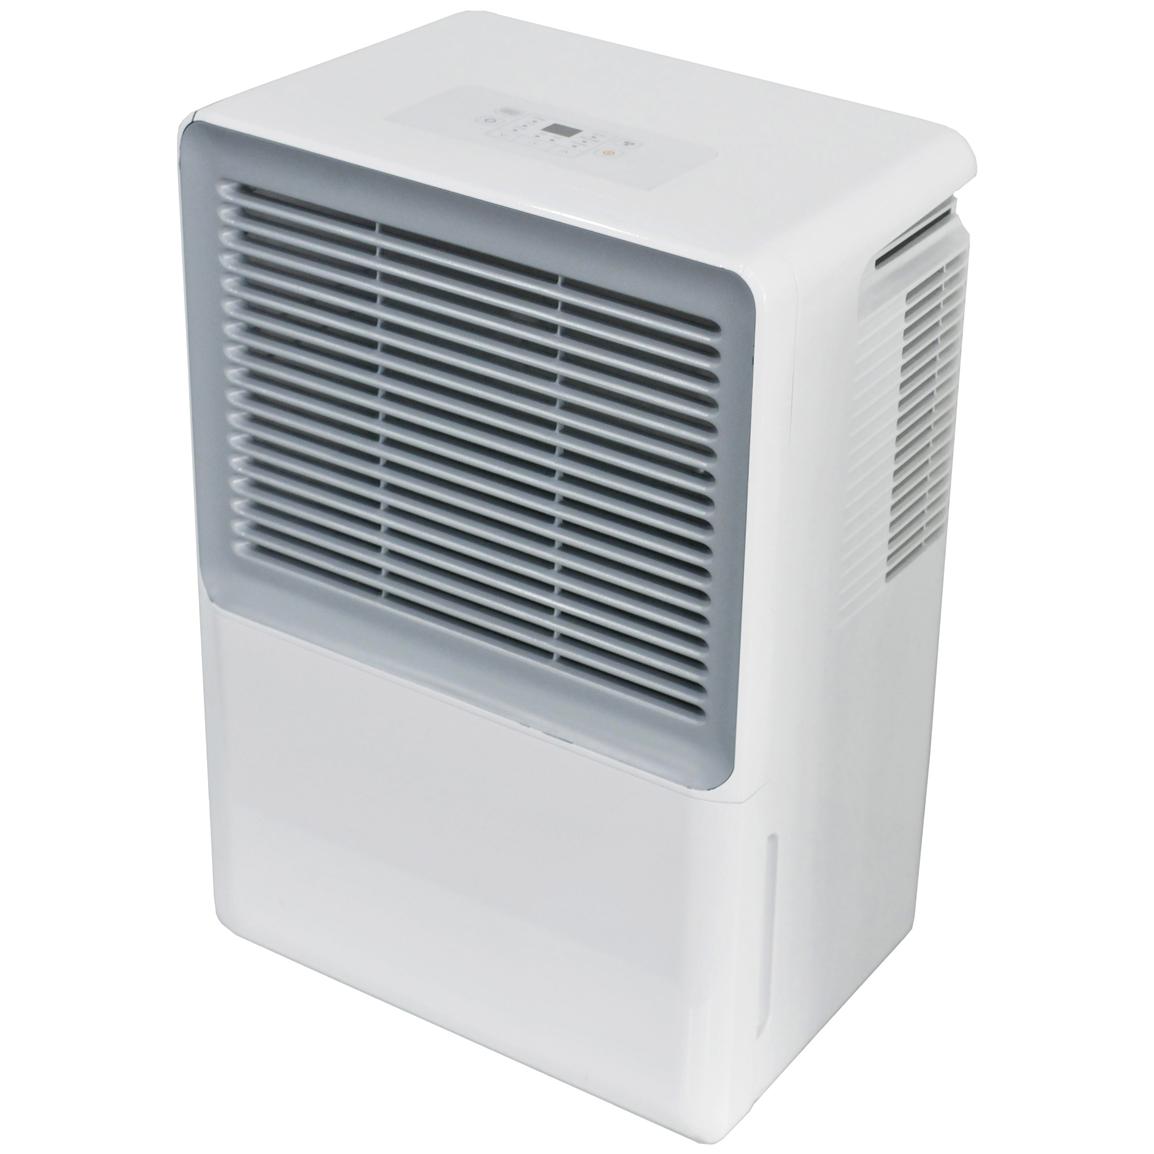 spt-70-pint-energy-star-dehumidifier-with-built-in-pump-593870